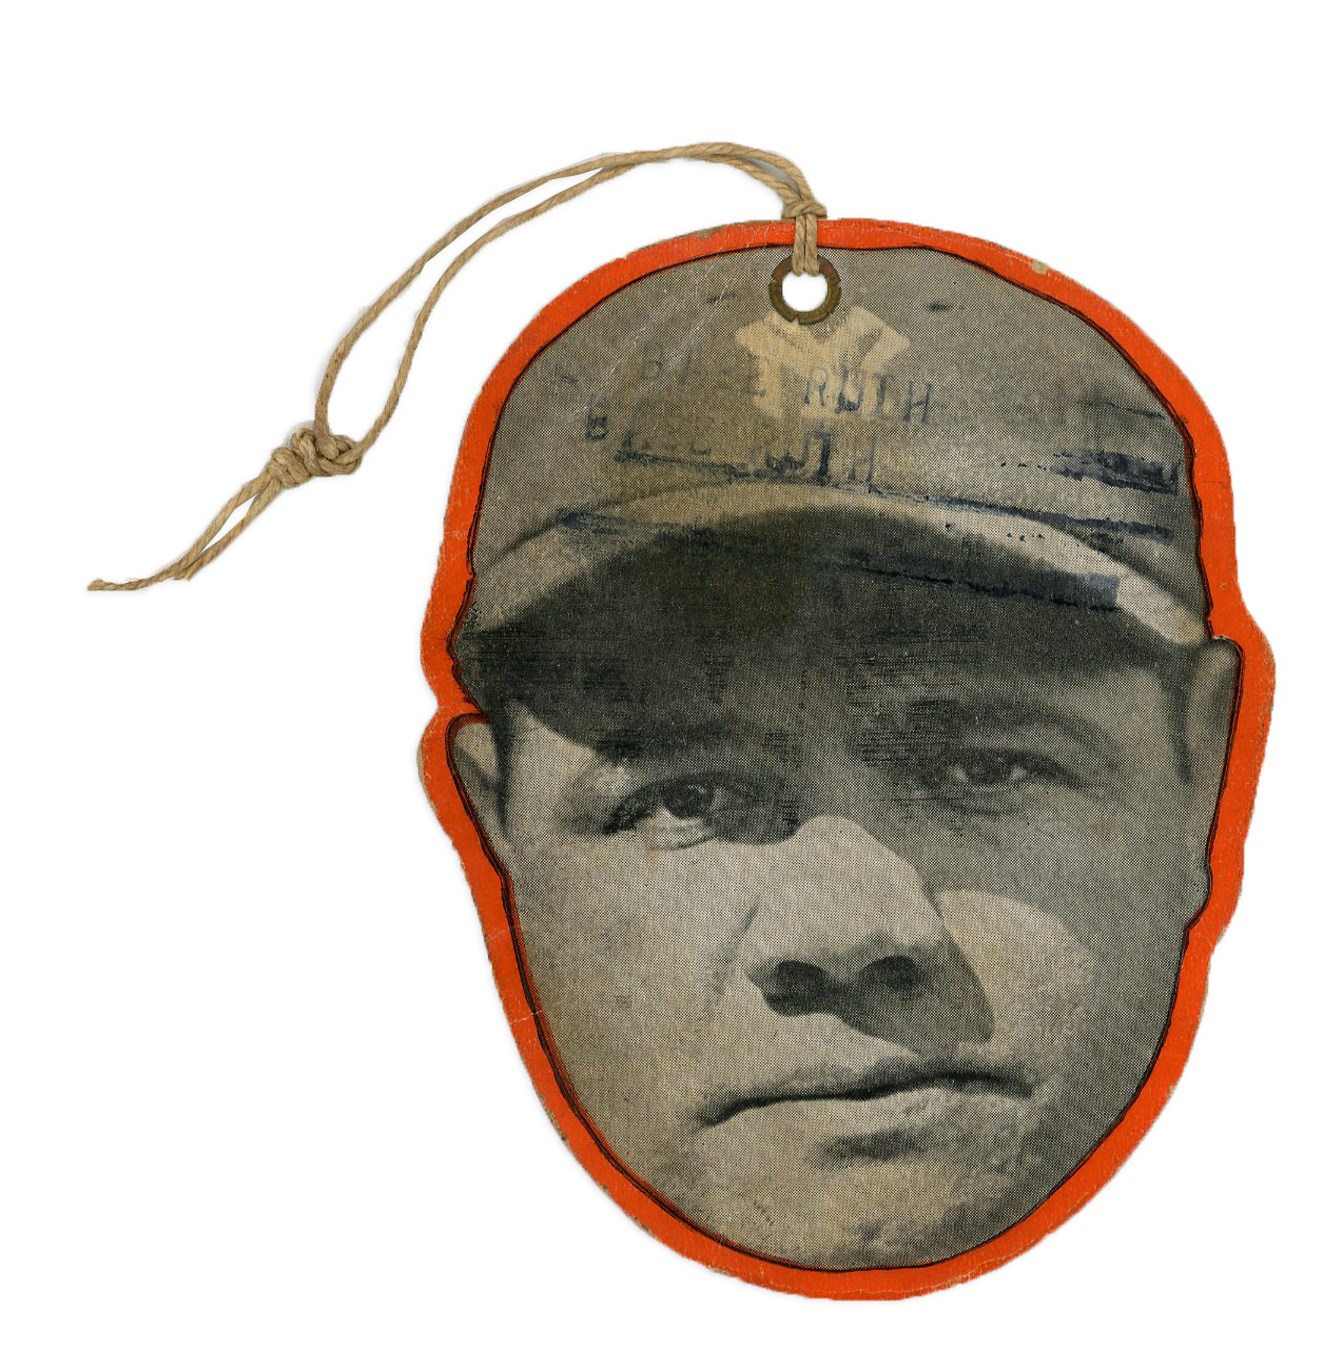 Babe Ruth 1920s Reach Large Die-Cut Illustrated Equipment Tag in the Shape of Ruth's Head